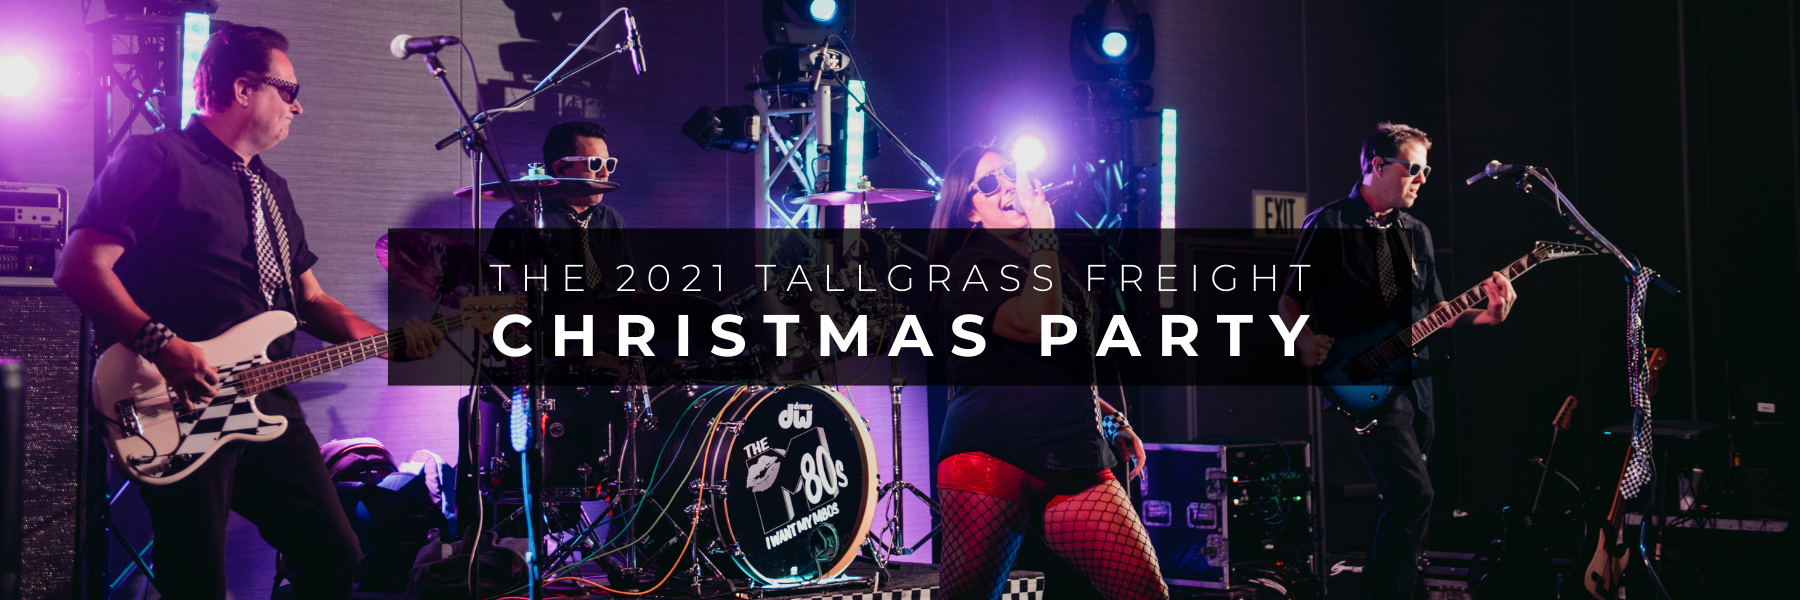 You are currently viewing Making Spirits Bright: The 2021 Tallgrass Christmas Party